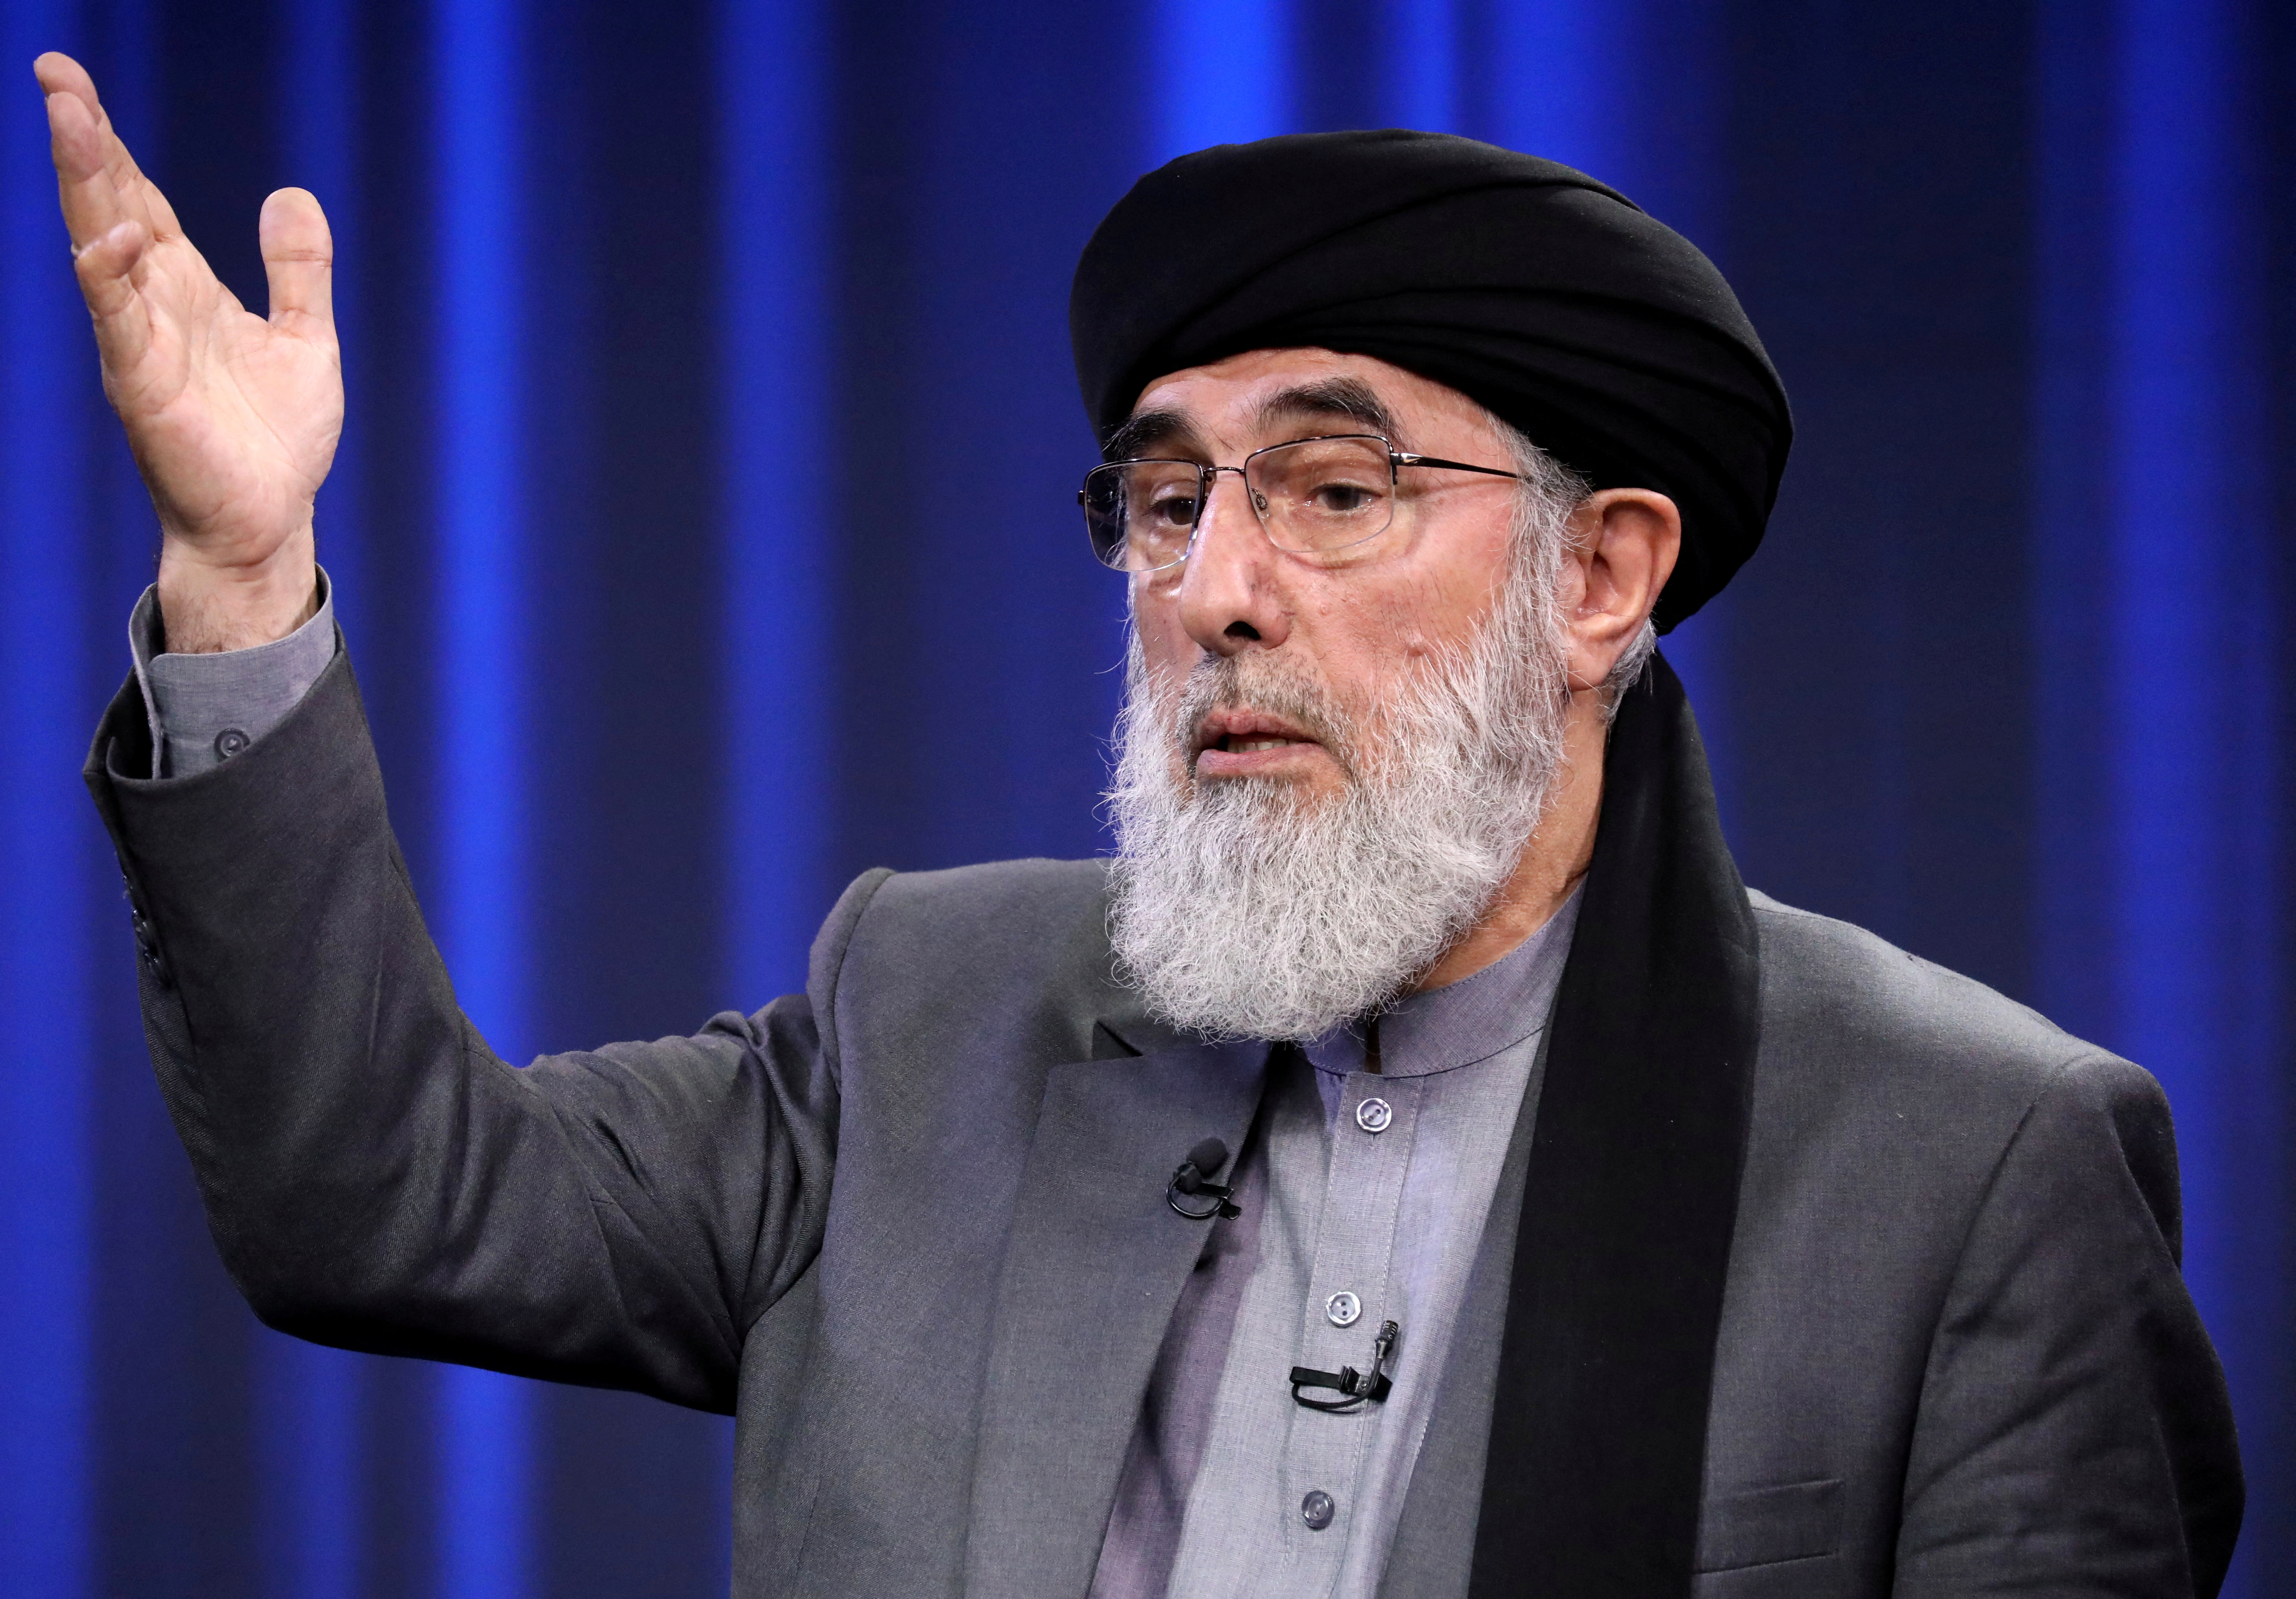 Former Afghan warlord and presidential candidate Gulbuddin Hekmatyar speaks during the presidential election debate at TOLO TV studio in Kabul